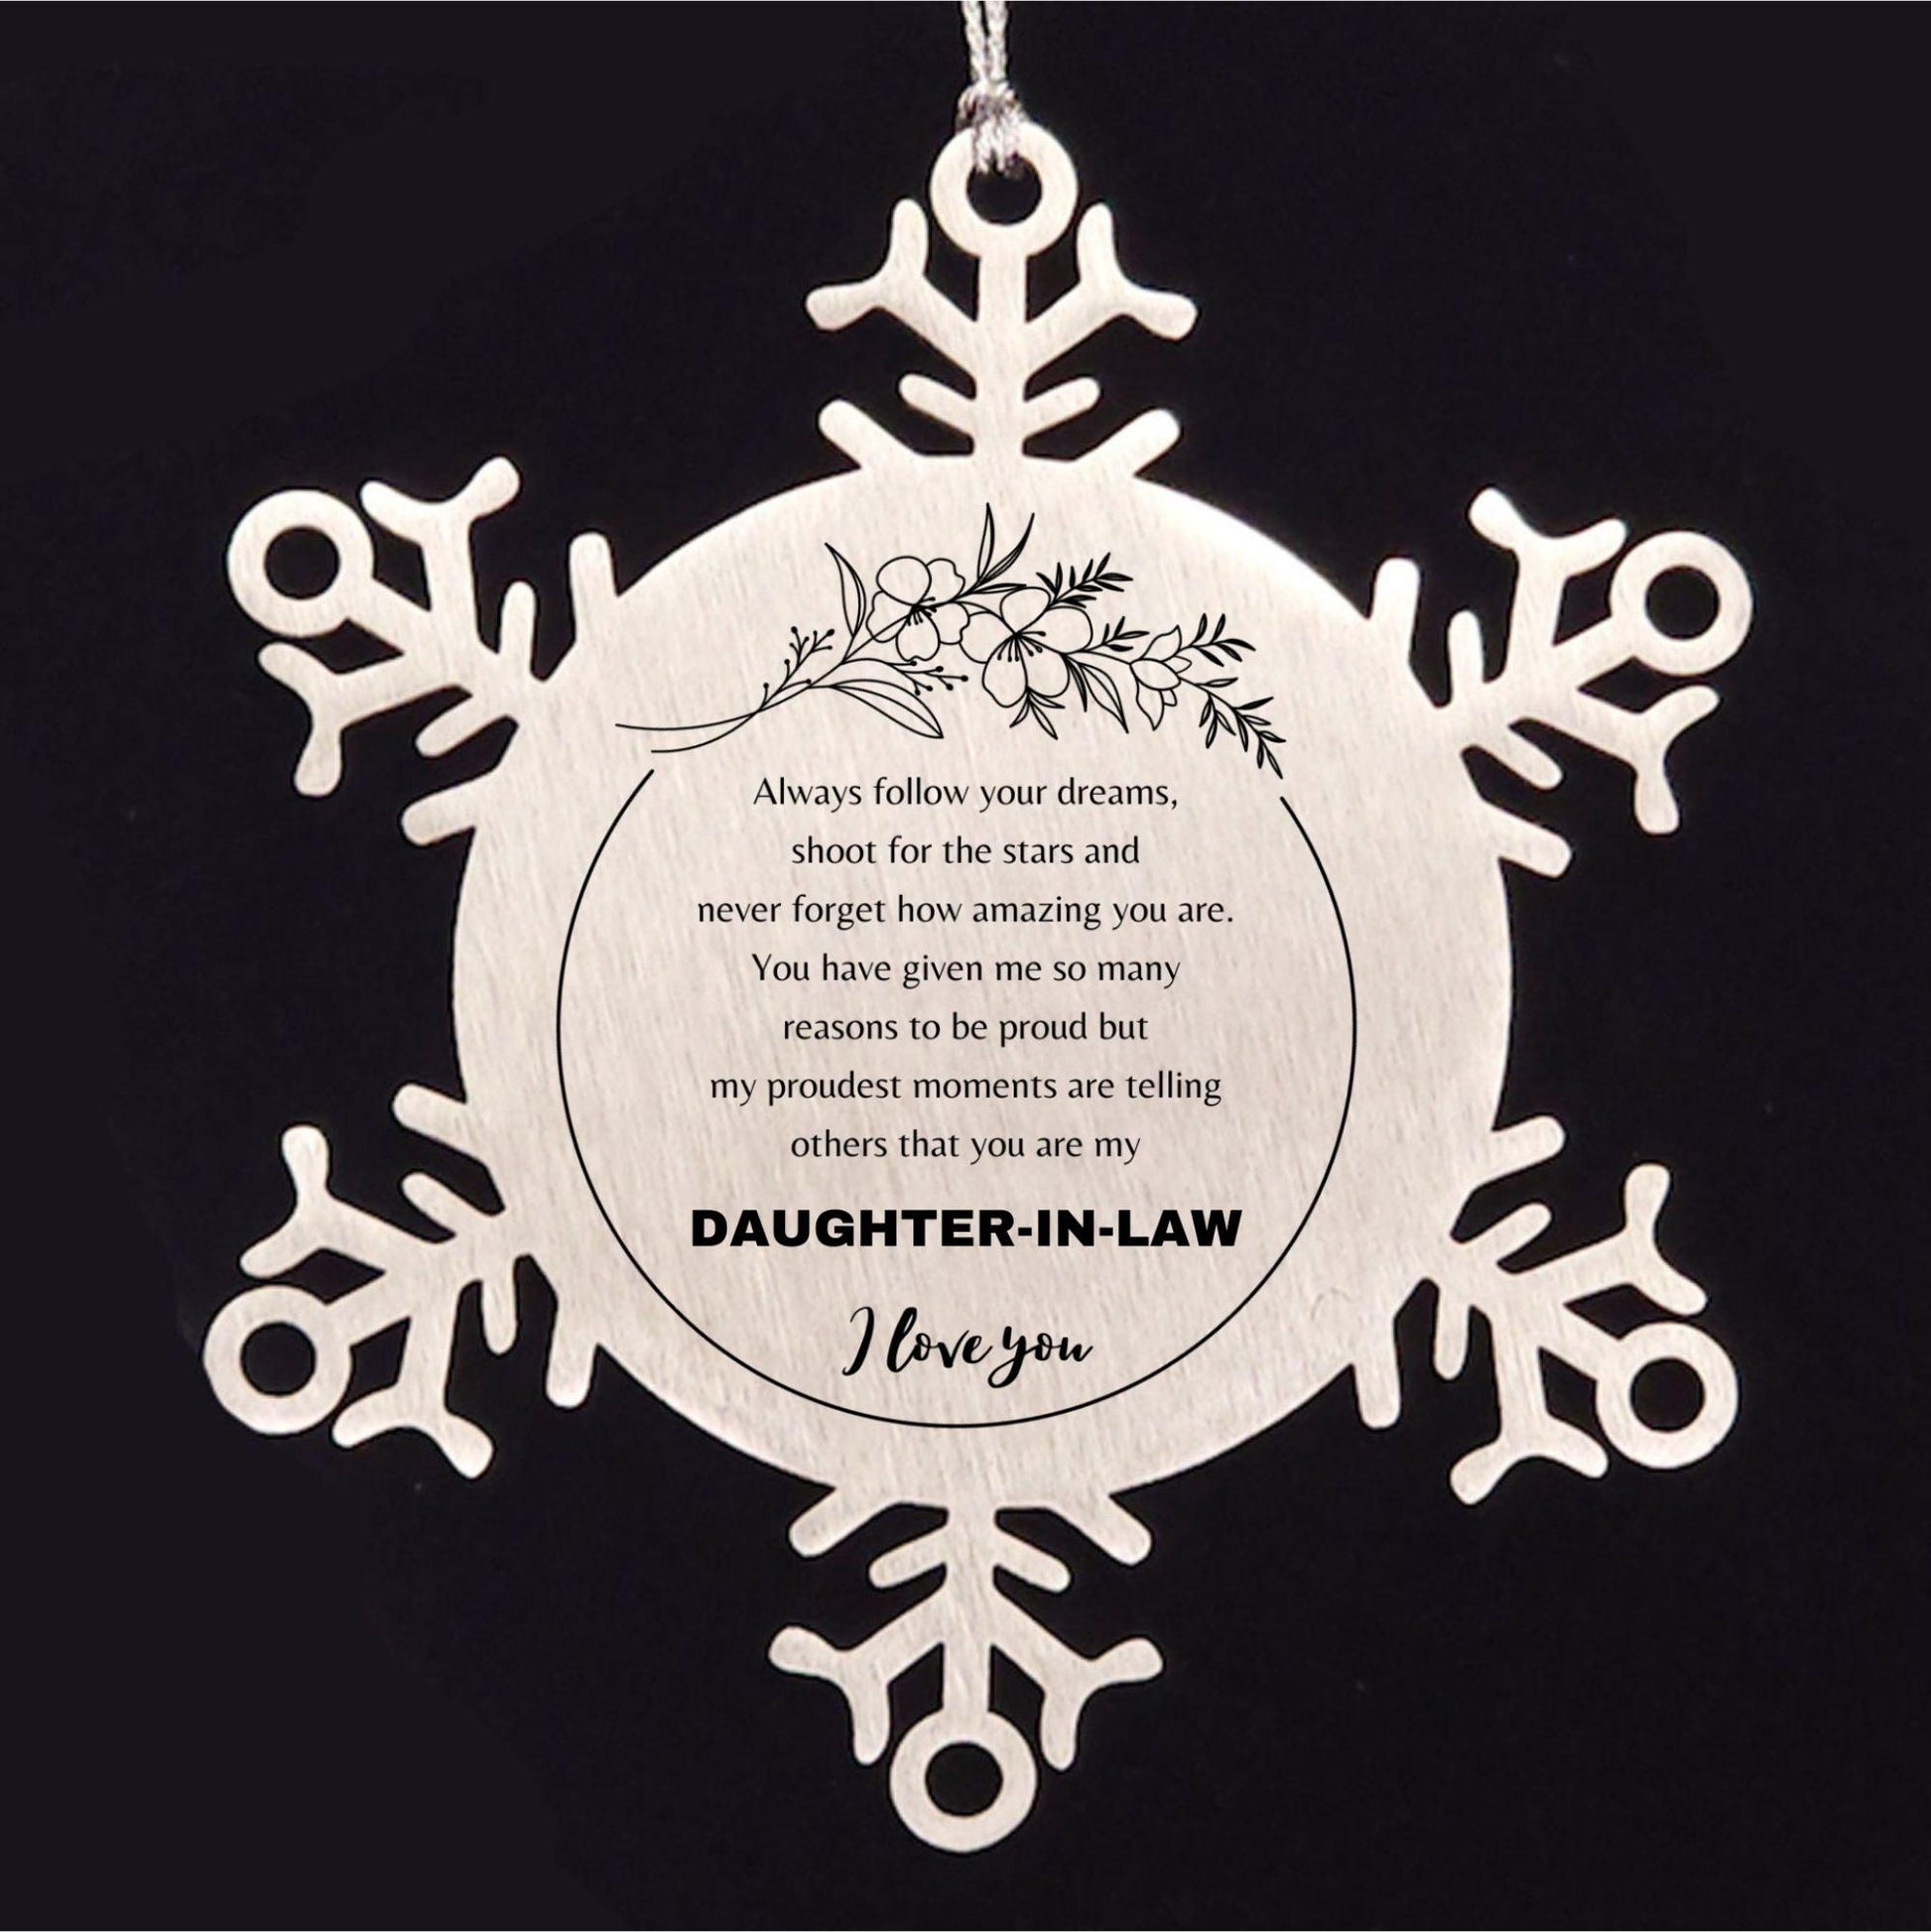 Daughter-In-Law Snowflake Ornament - Always Follow your Dreams - Birthday, Christmas Holiday Jewelry Gift - Mallard Moon Gift Shop